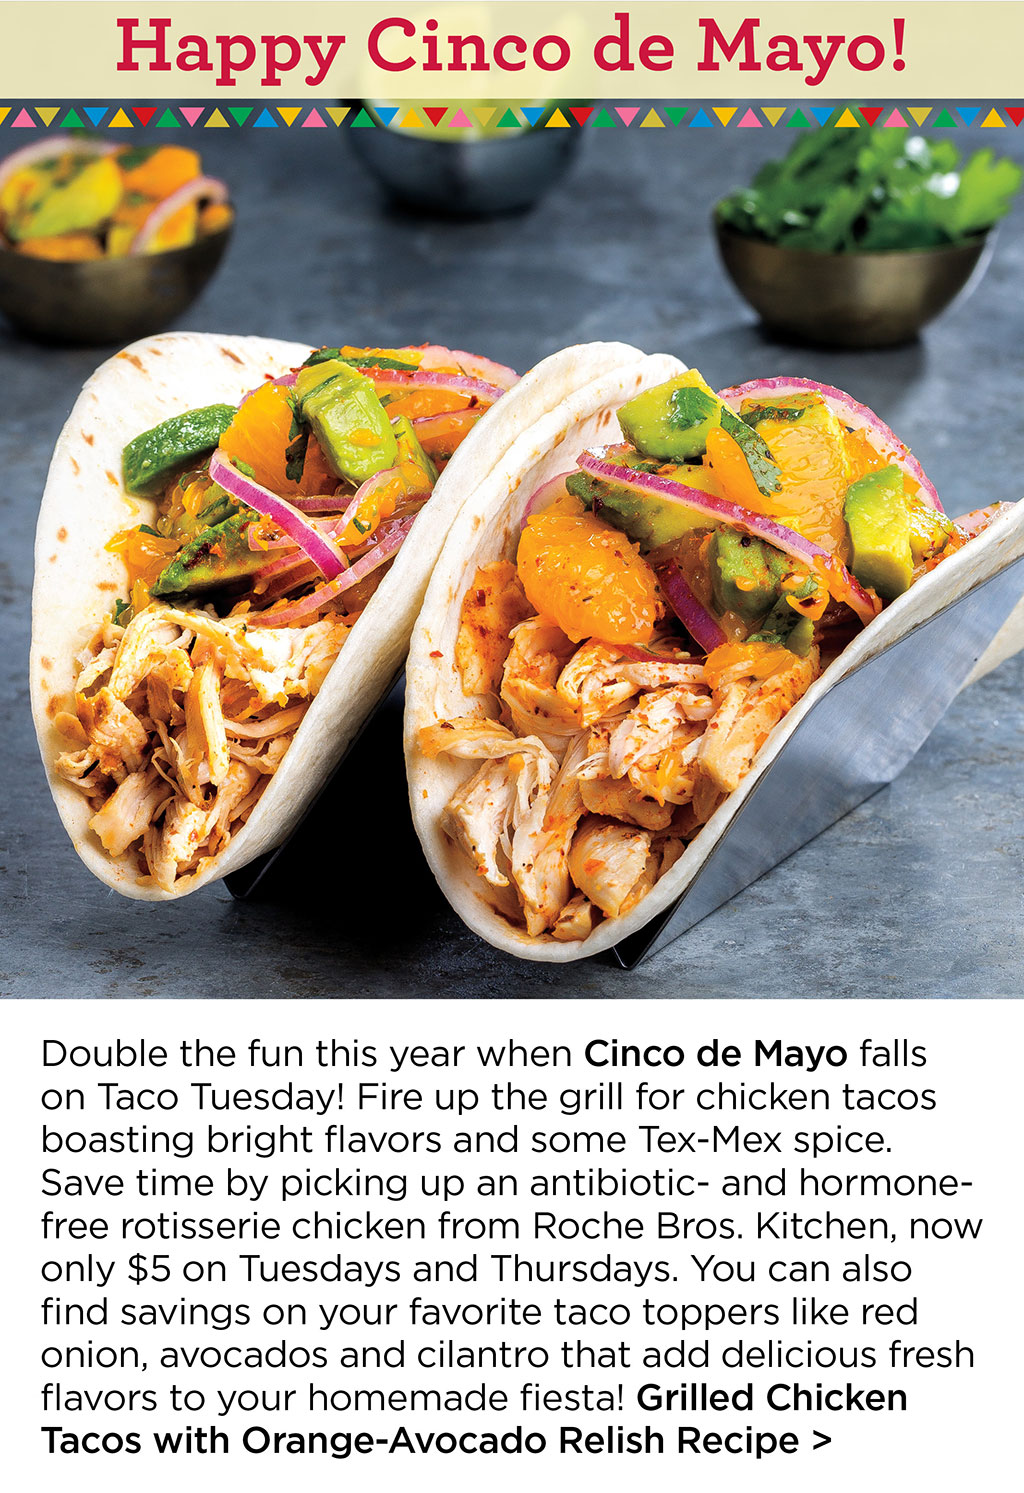 Happy Cinco de Mayo! Double the fun this year when Cinco de Mayo falls on Taco Tuesday! Fire up the grill for chicken tacos boasting bright flavors and some Tex-Mex spice. Save time by picking up an antibiotic- and hormone-free rotisserie chicken from Roche Bros. Kitchen, now only $5 on Tuesdays and Thursdays. You can also find savings on your favorite taco toppers like red onion, avocados and cilantro that add delicious fresh flavors to your homemade fiesta! Grilled Chicken Tacos with Orange-Avocado Relish Recipe >